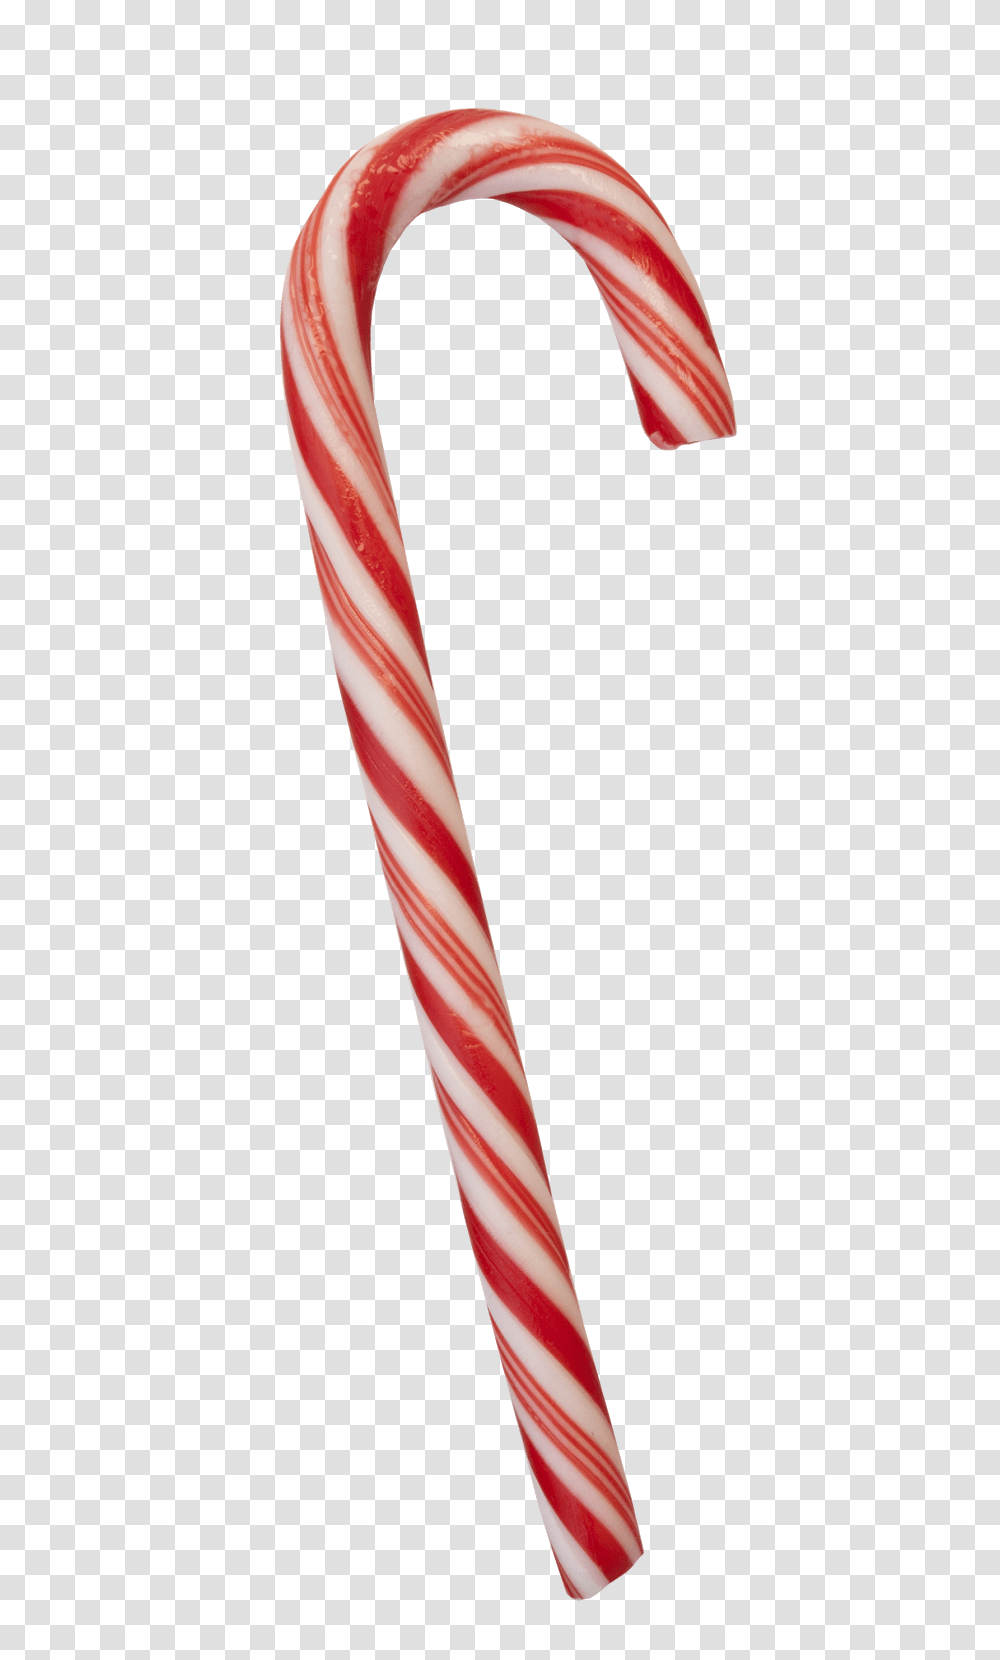 Christmas Candy, Food, Sweets, Confectionery, Lollipop Transparent Png